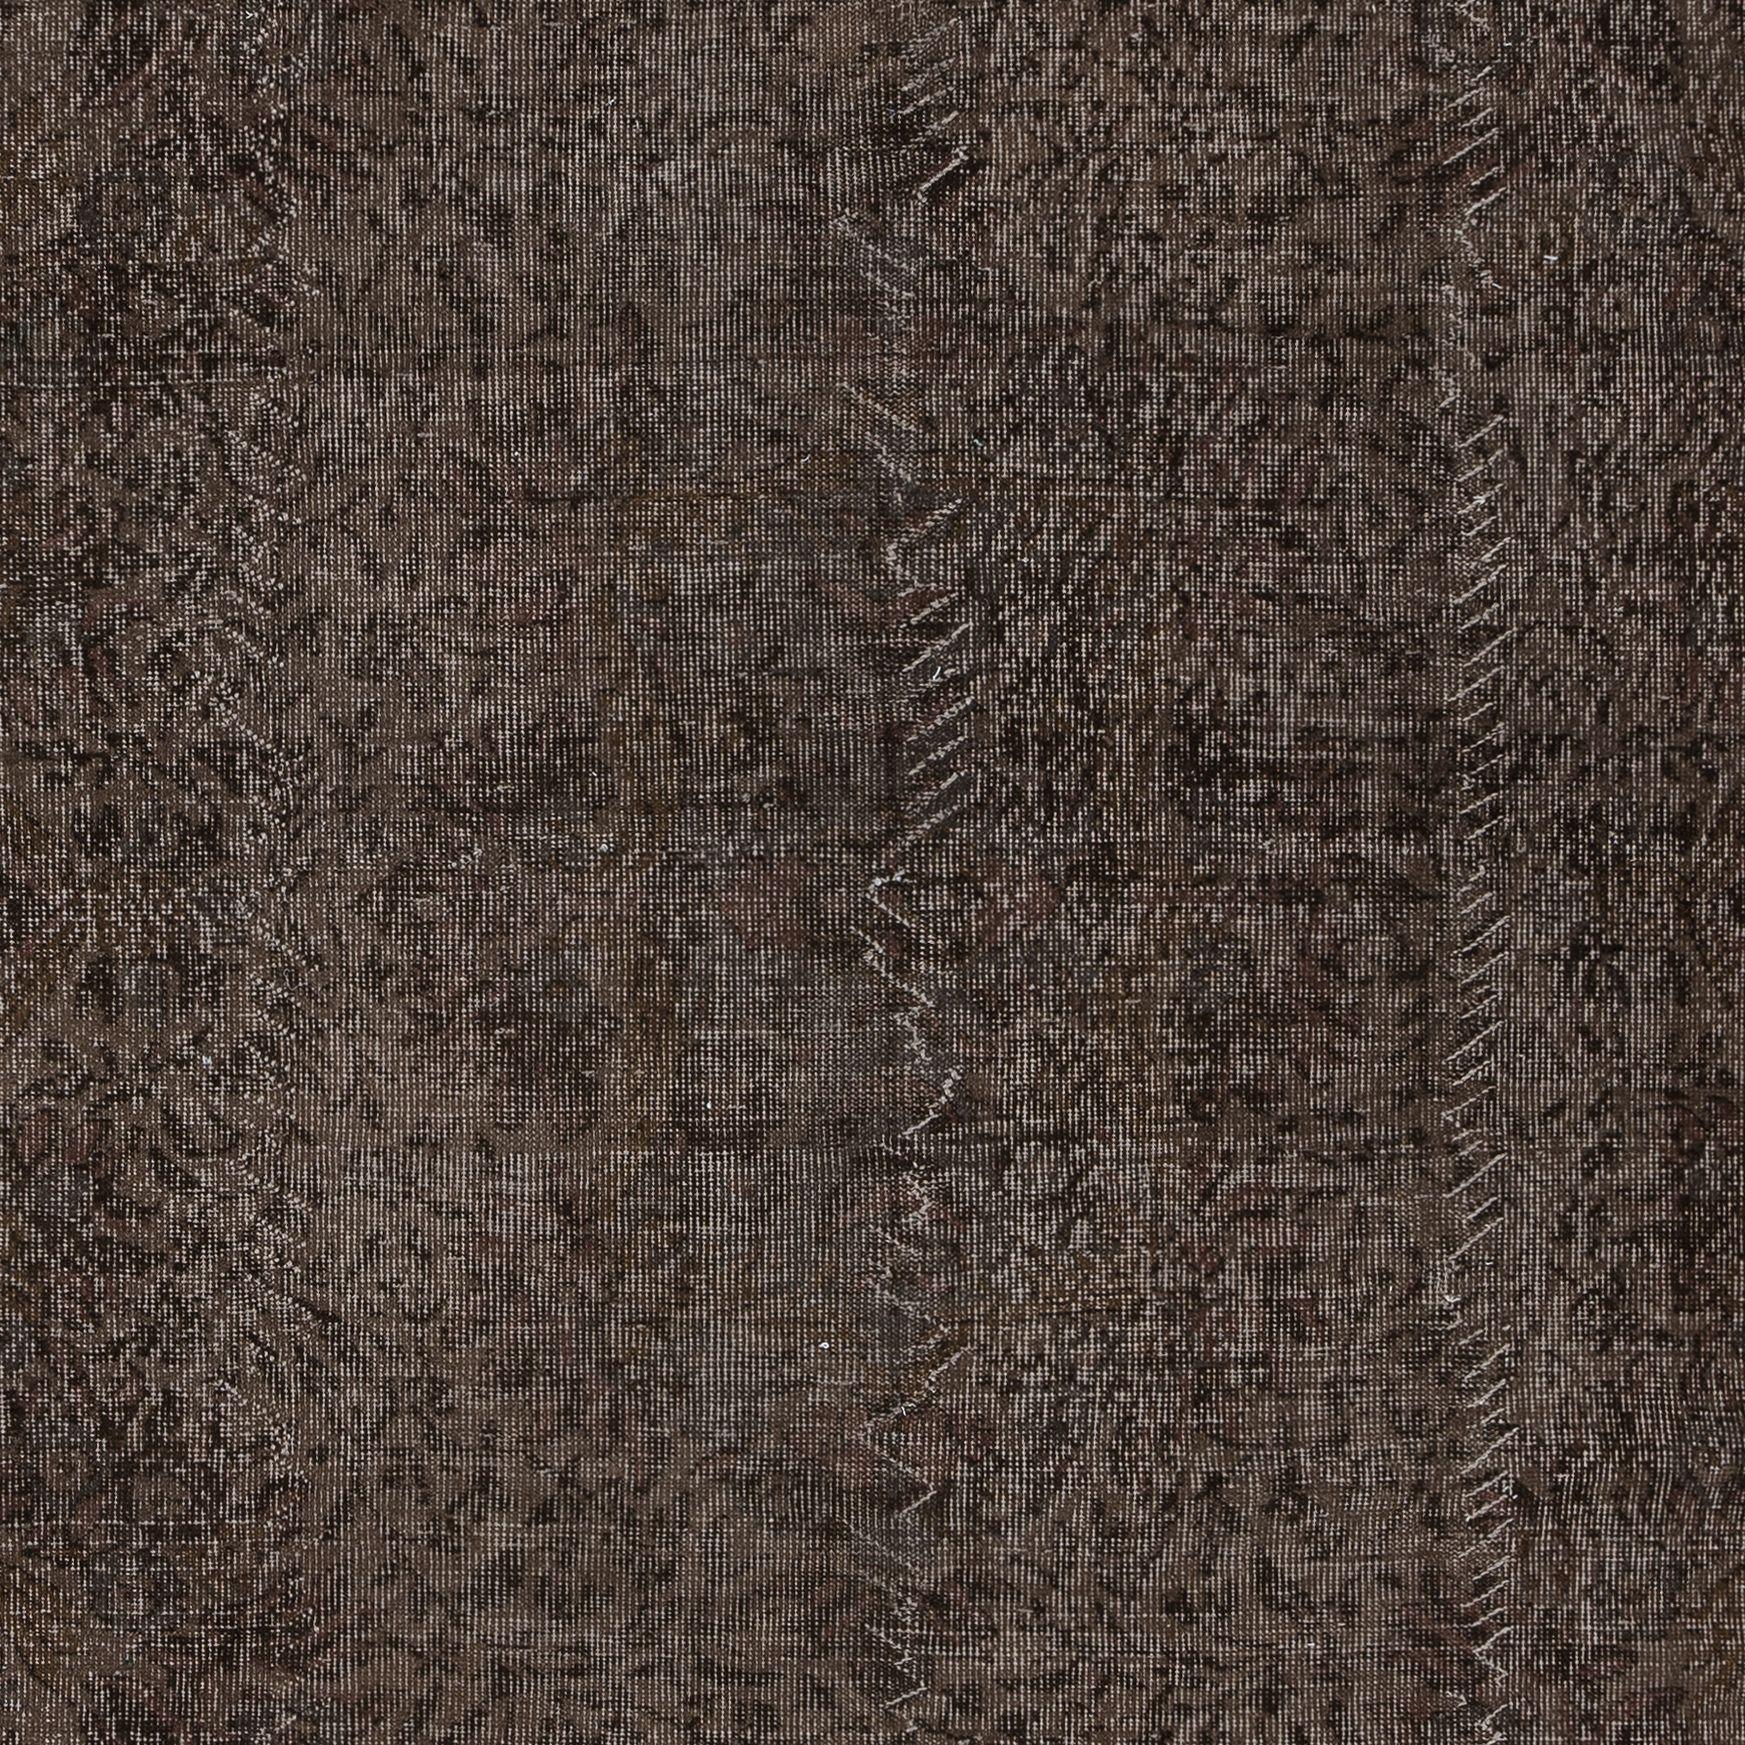 Hand-Woven 6x8.4 Ft Brown Solid Modern Area Rug for Modern Interiors, Handknotted in Turkey For Sale